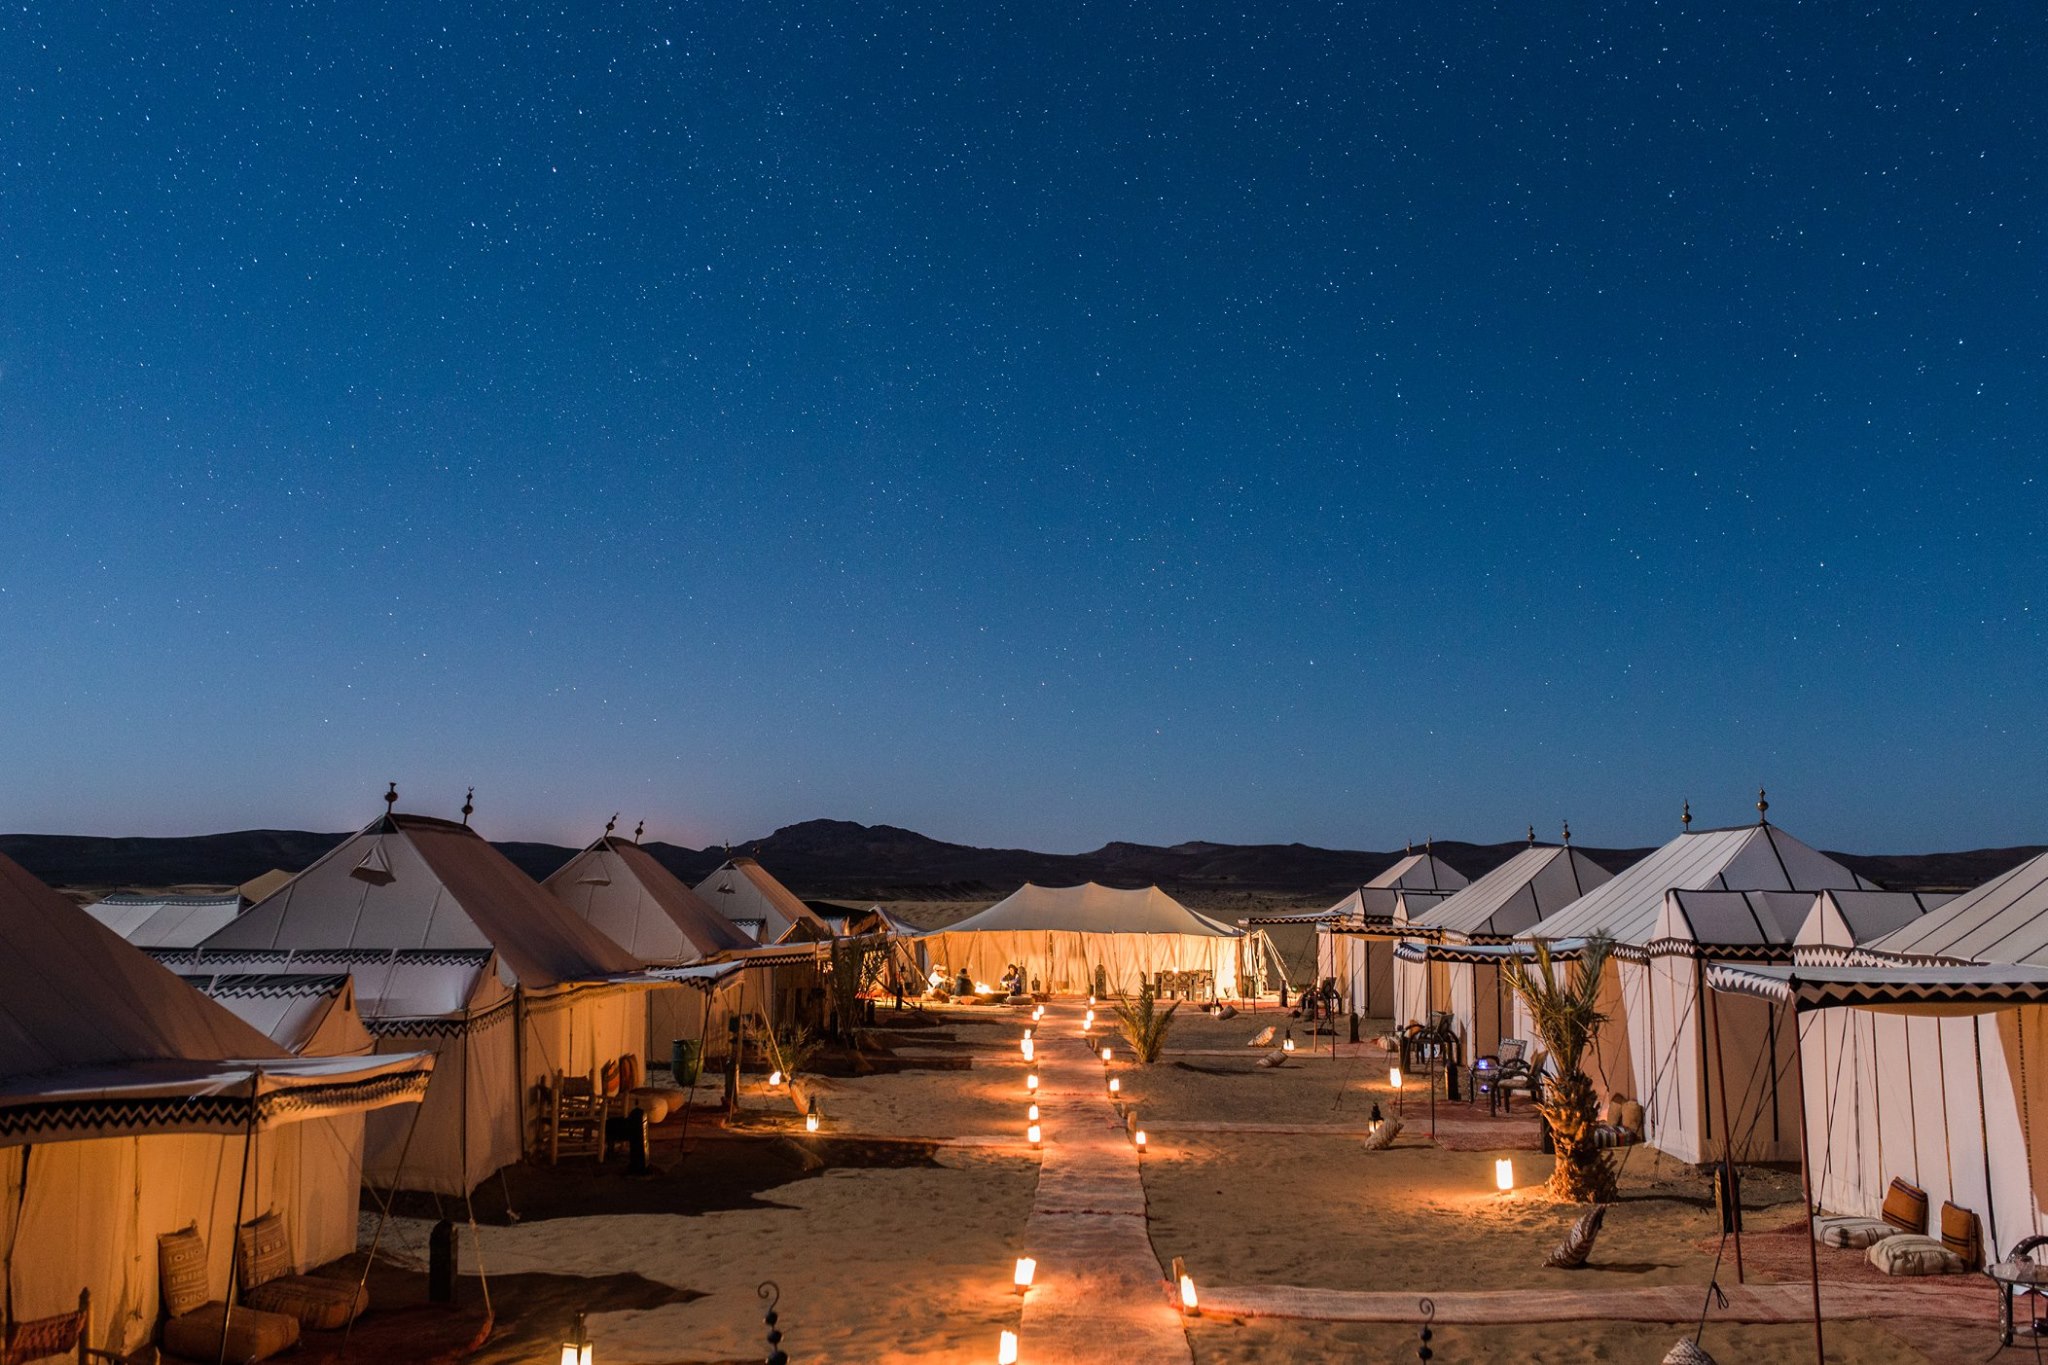 Luxury desert camp in Morocco, Sahara desert eco-friendly experience with Paladar y Tomar